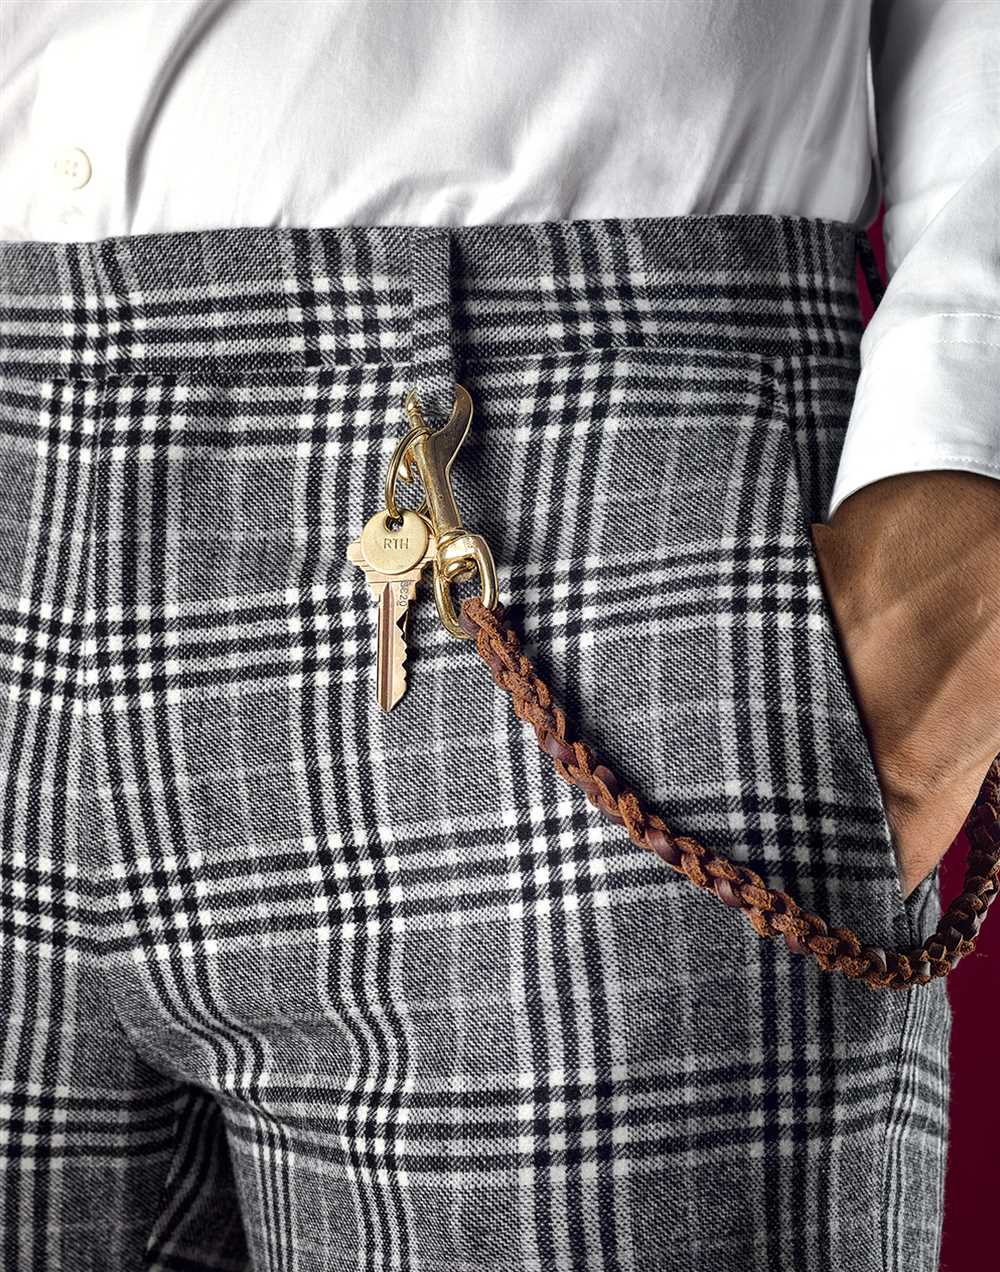 Choosing the right lanyard for your pants